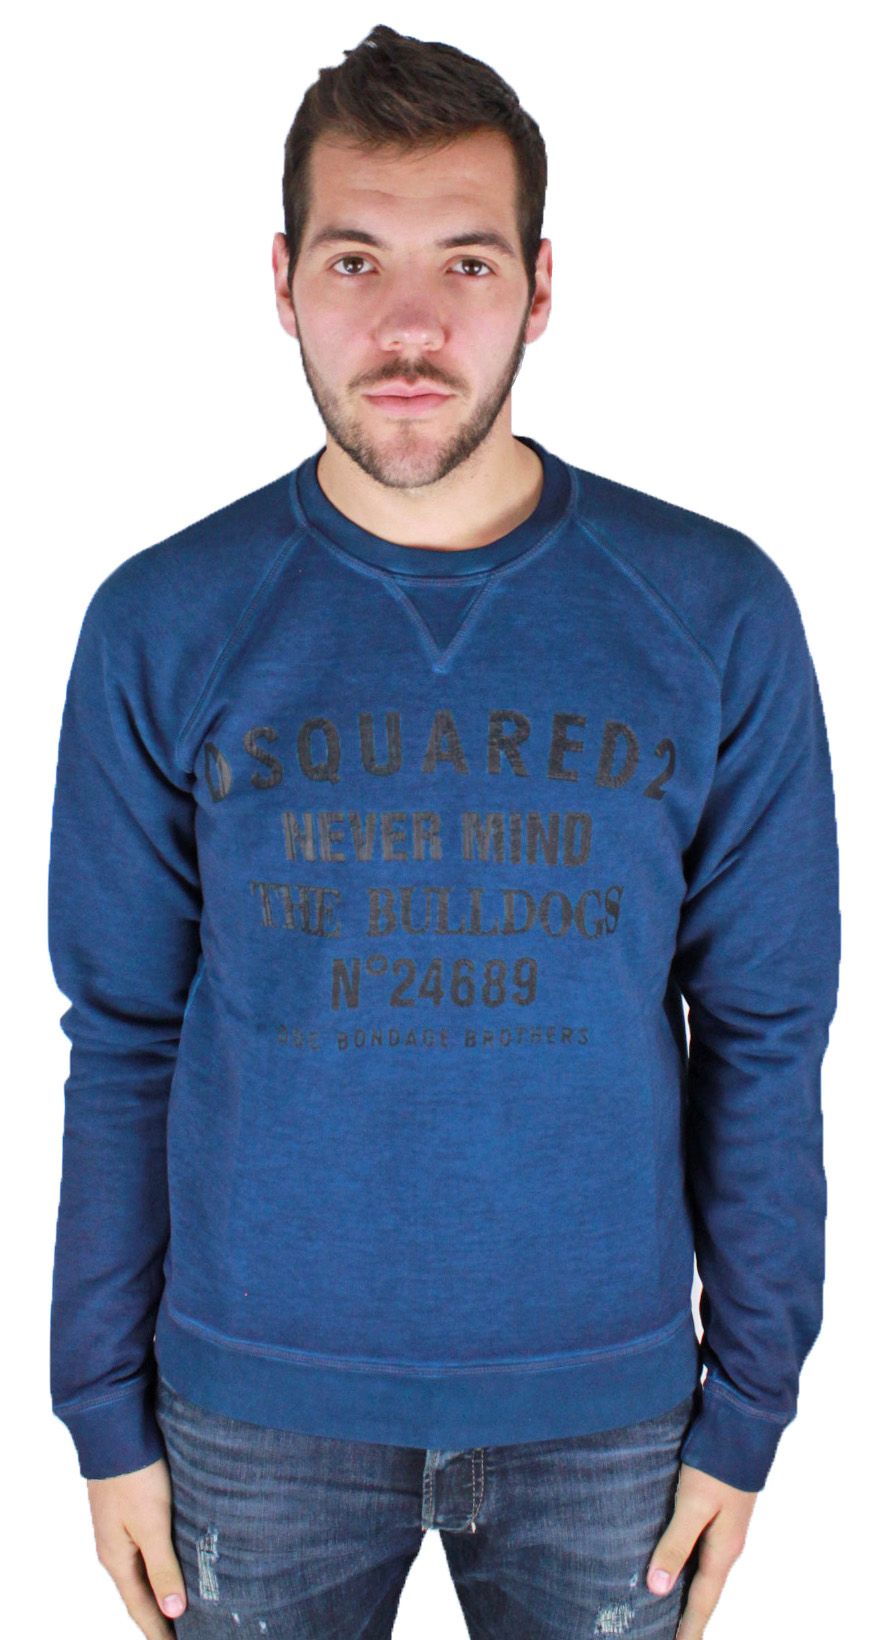 DSquared2 S74GU0139 505 Jumper. DSquared2 Blue Jumper. 100% Cotton. Made in Italy. DSquared2 Branding on Front of Jumper. RRP �245